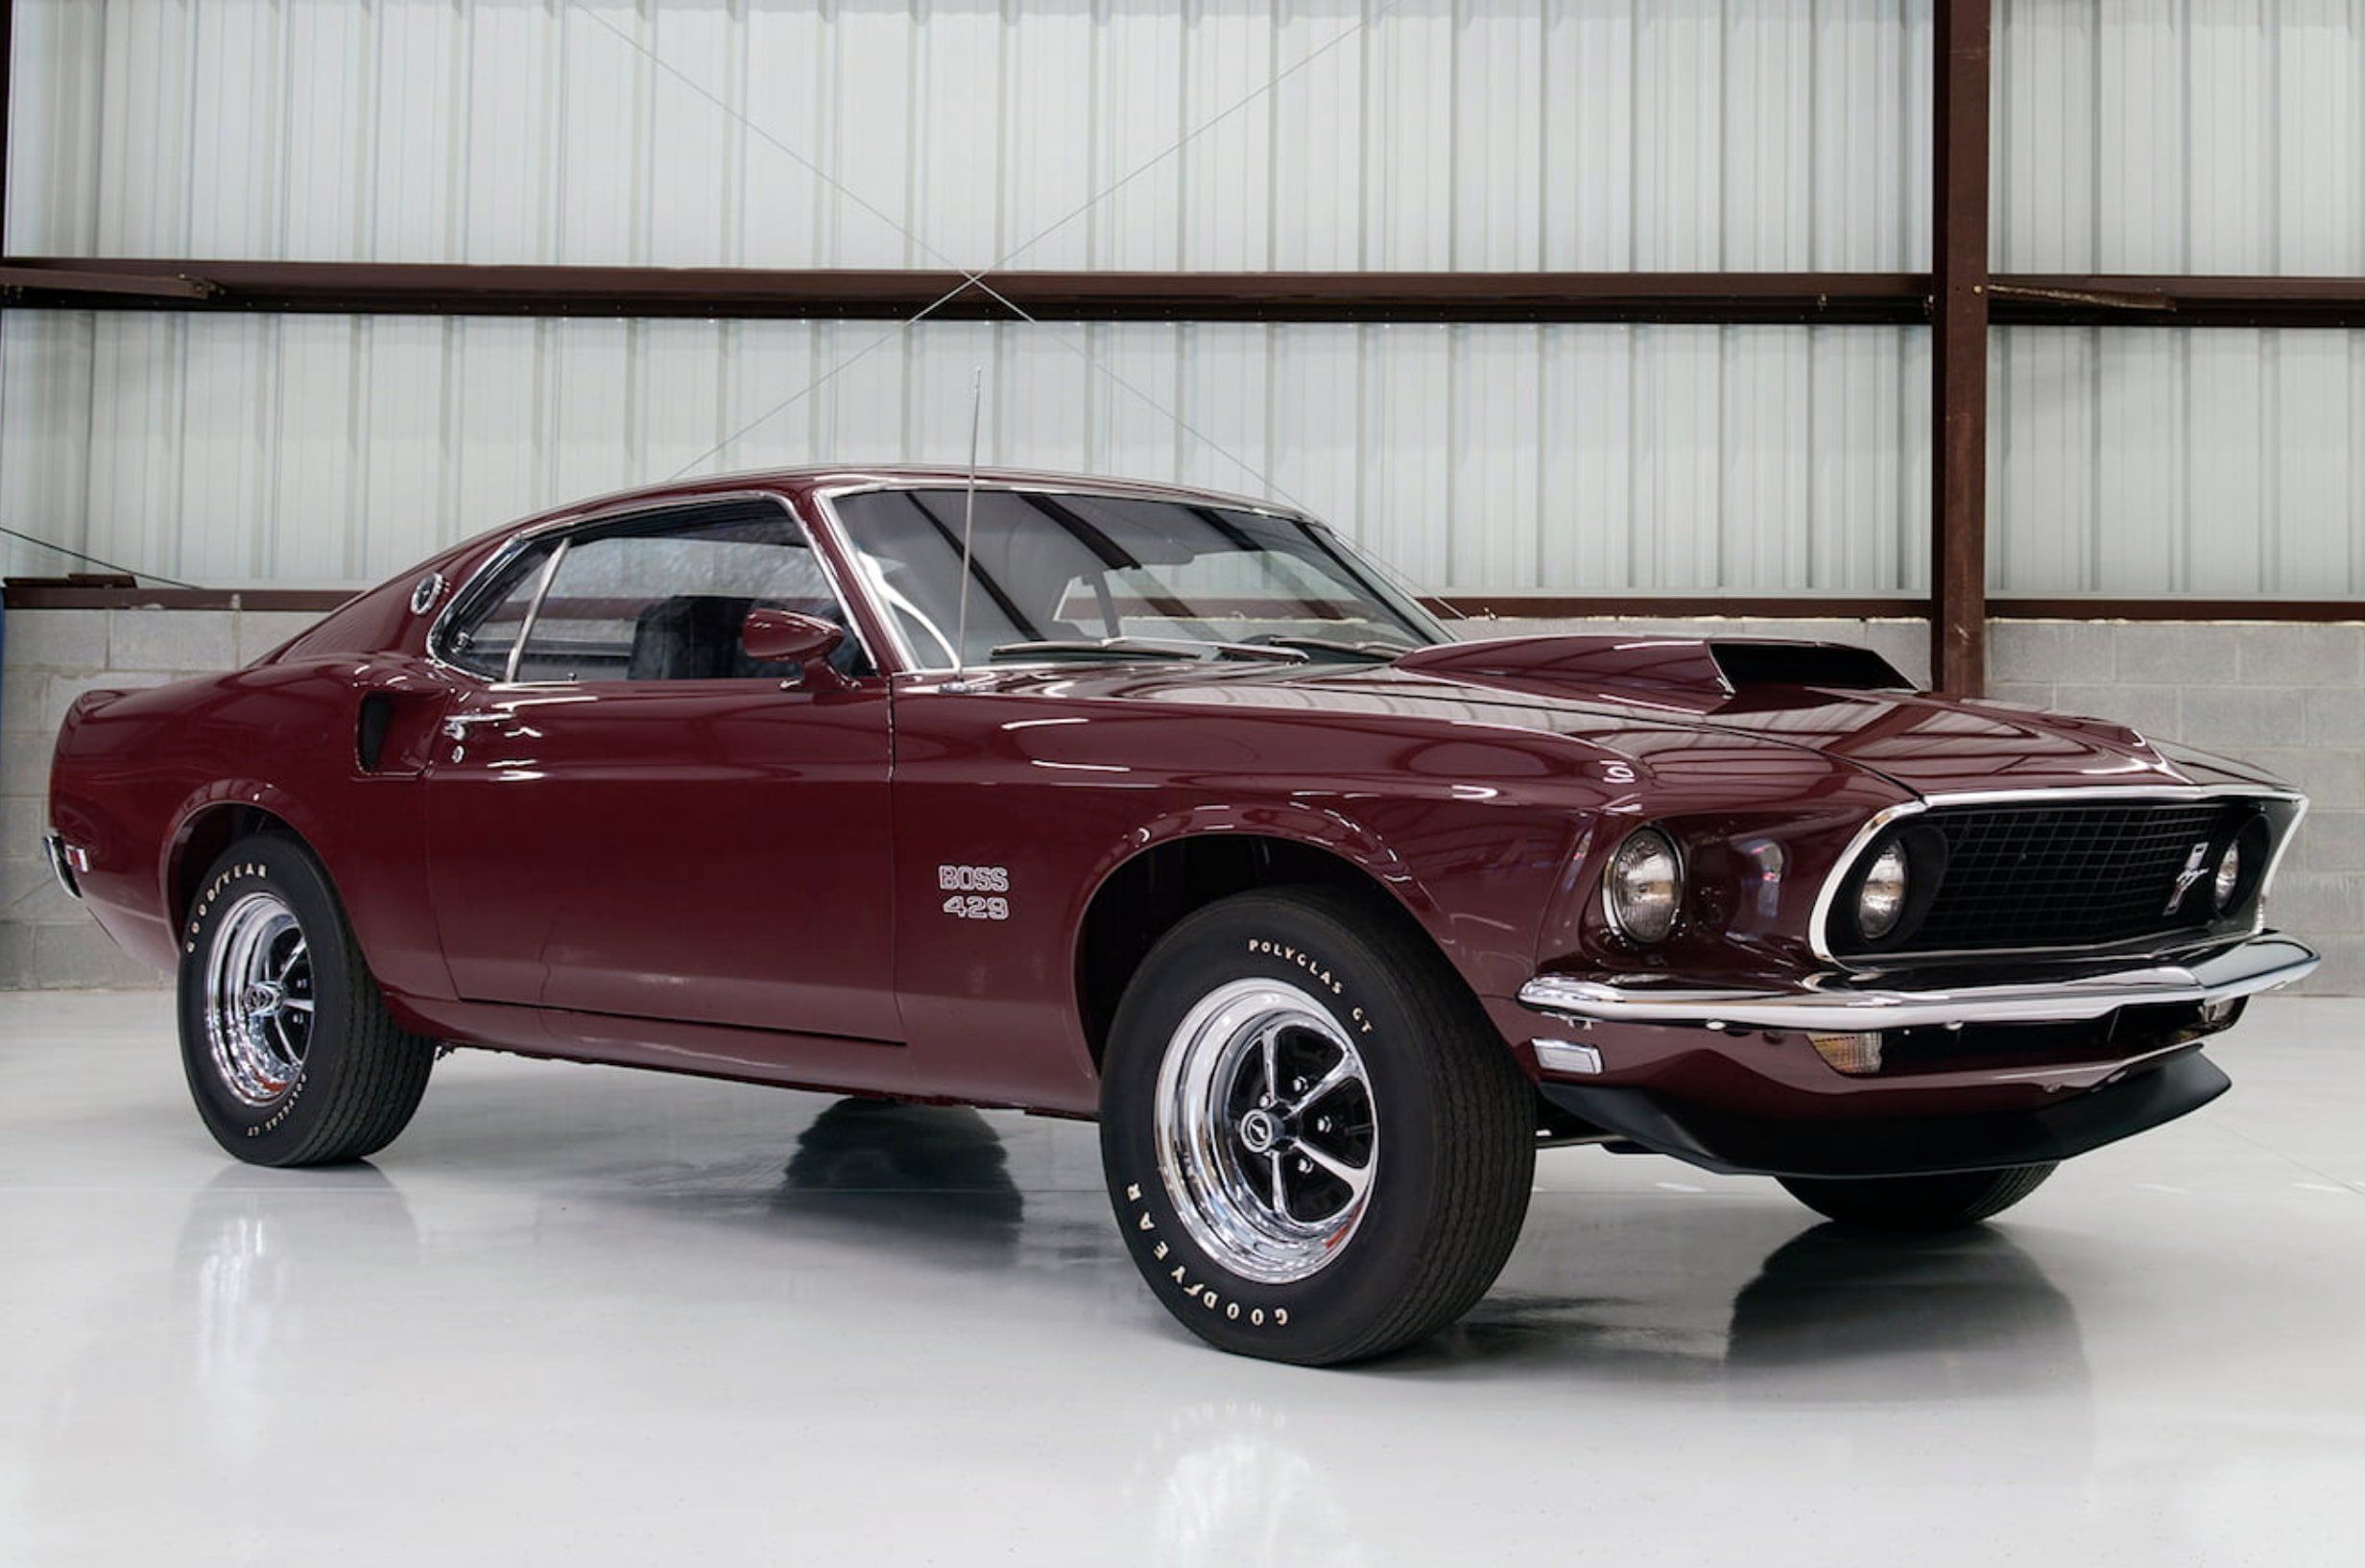 Boss 429 Red Ford Mustang